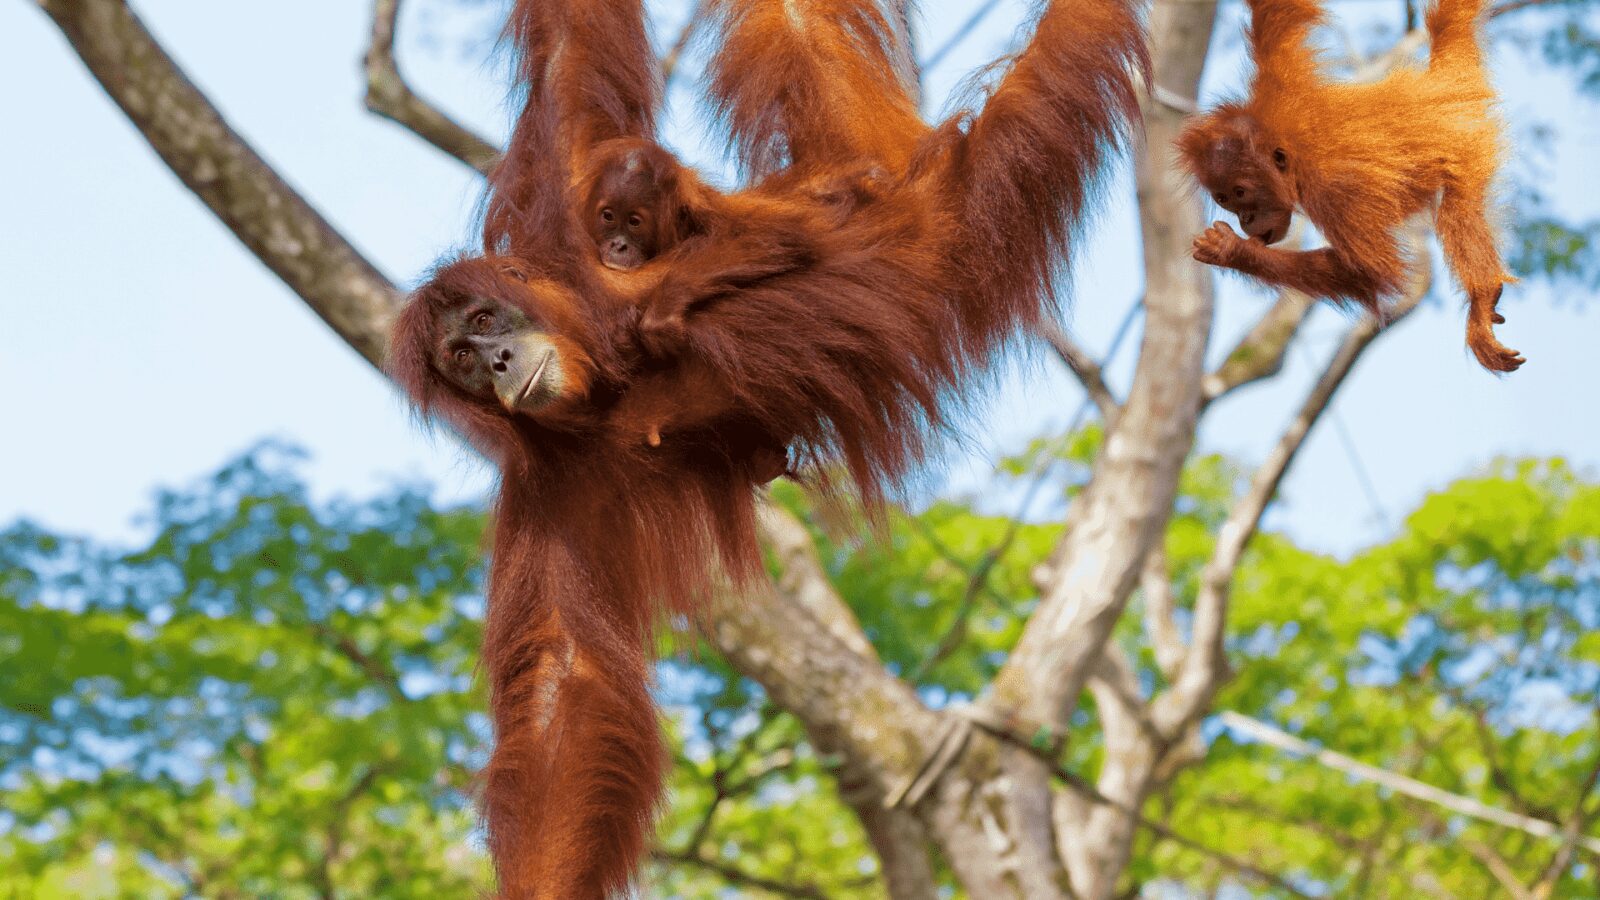 Red Hair in the Animal Kingdom